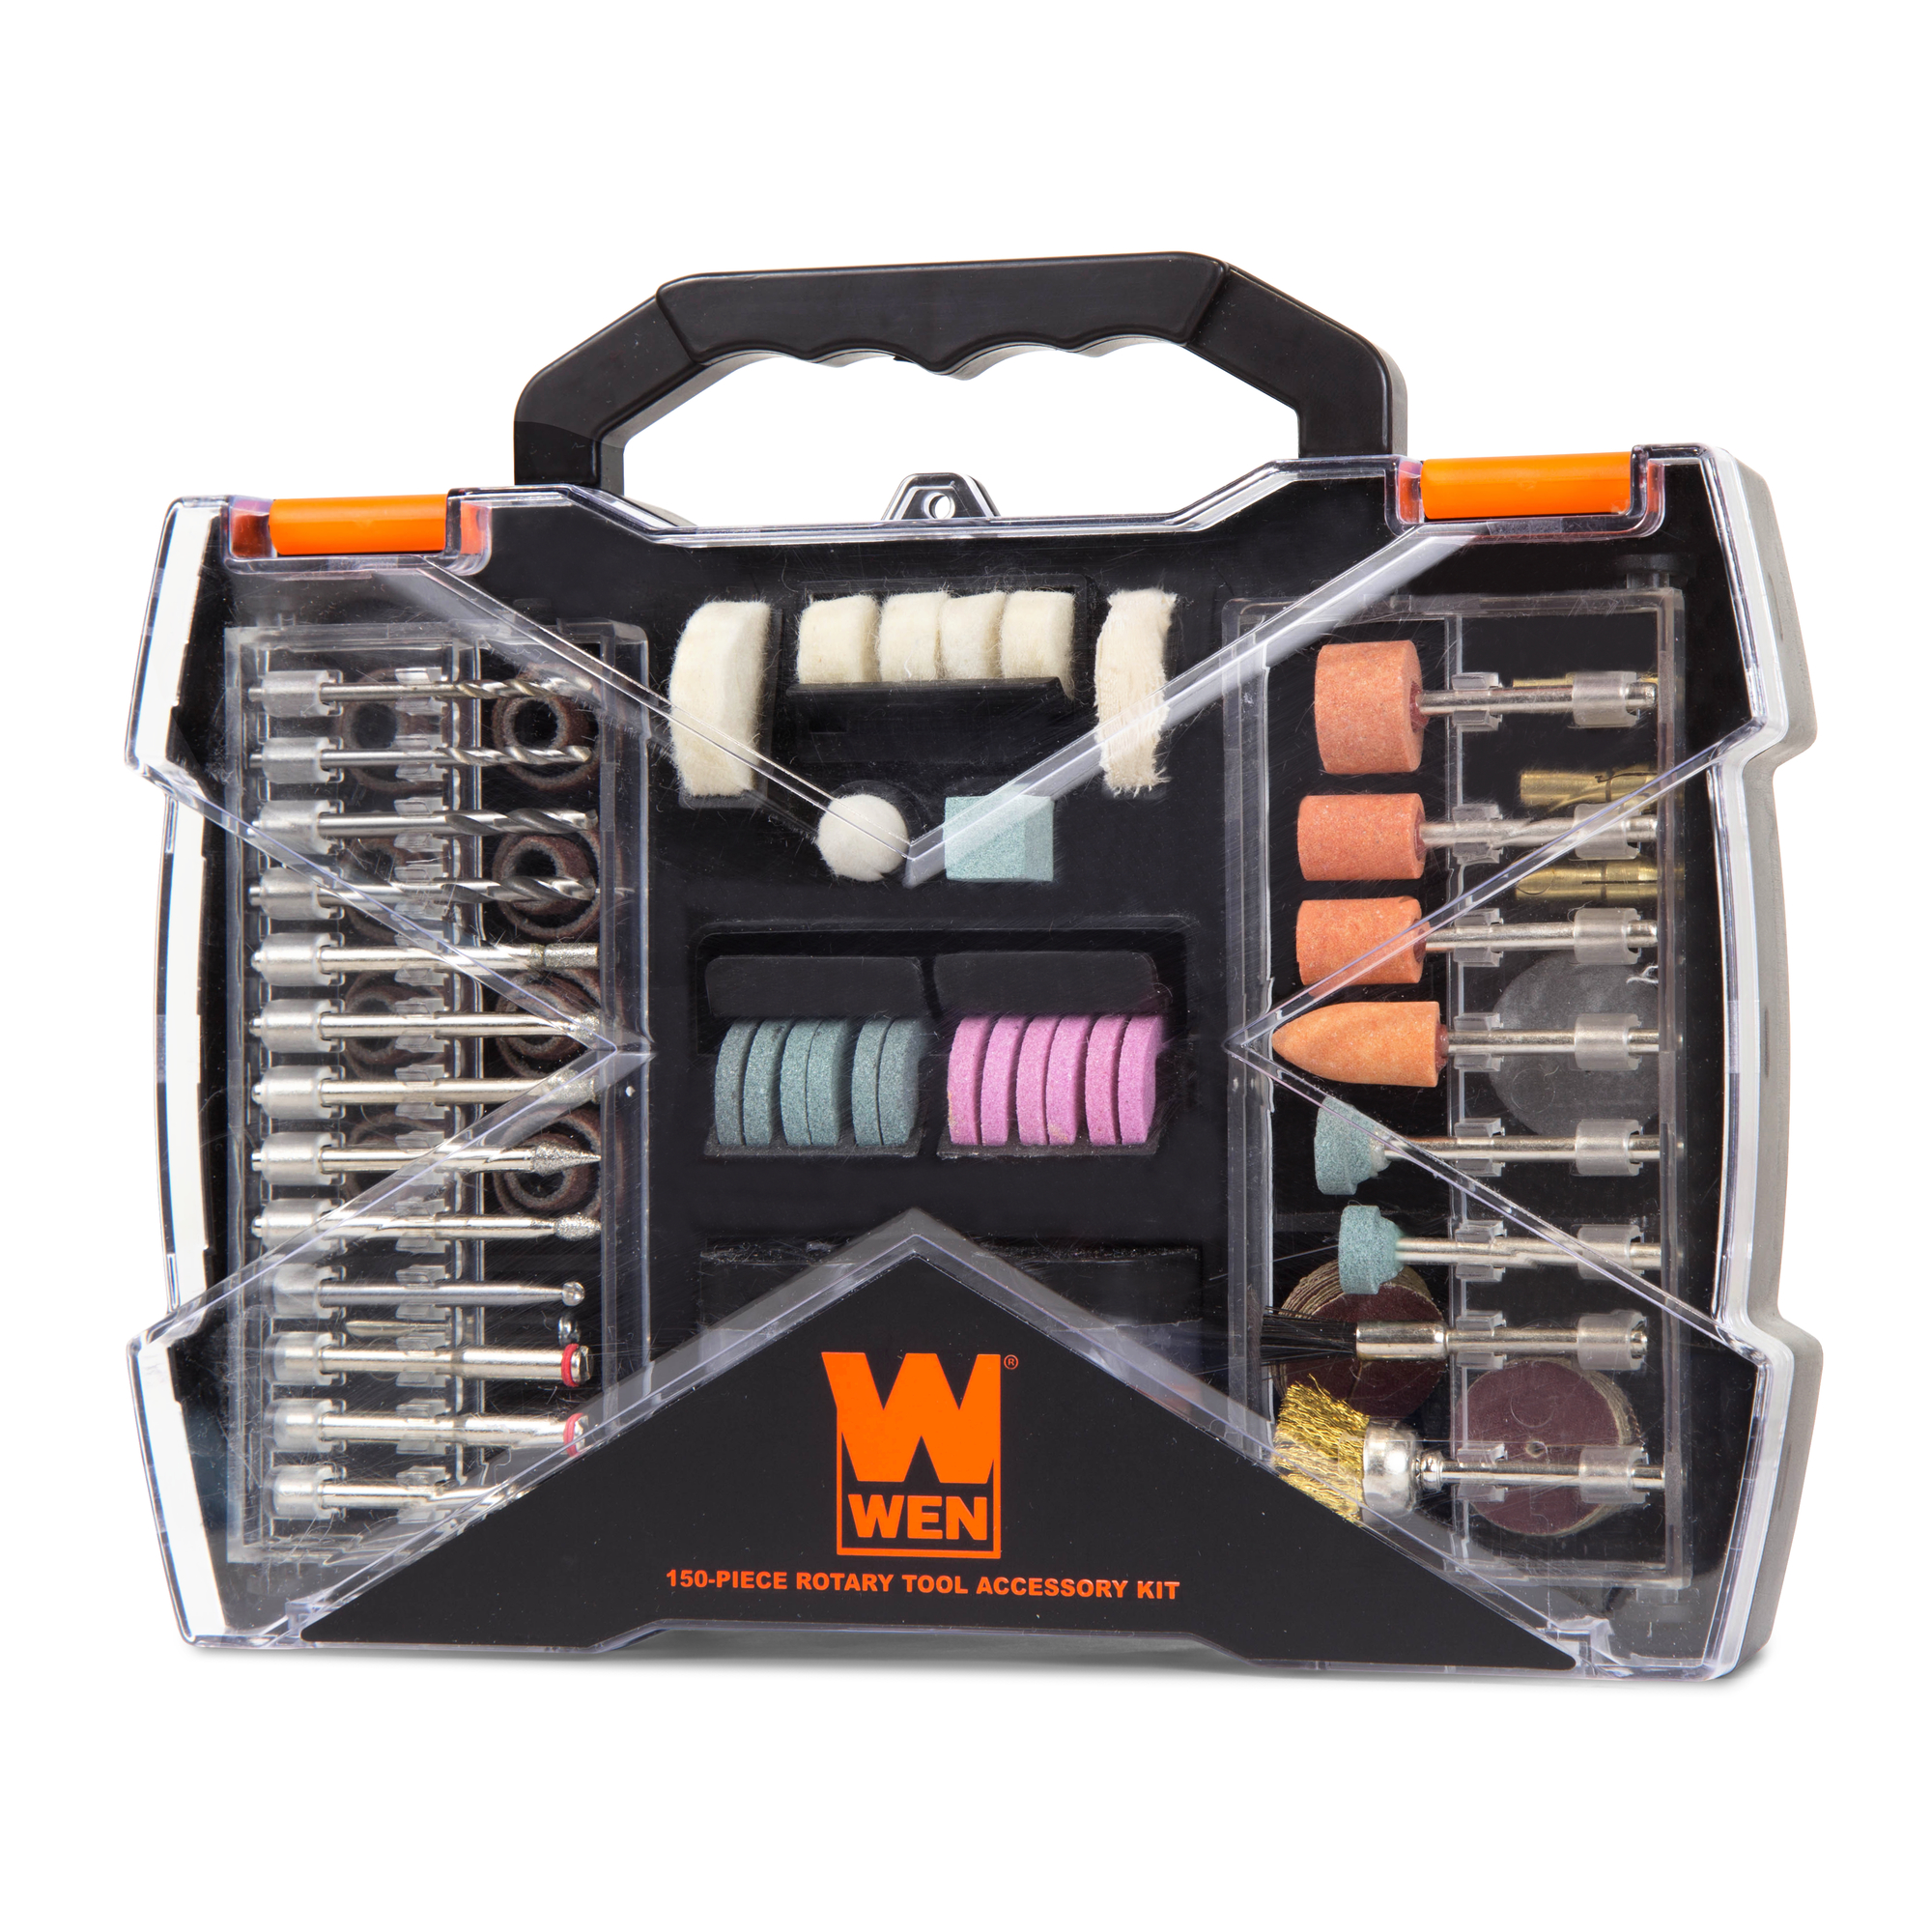 WEN, 150-pc Rotary Tool Accessory Kit w/ Carrying Case, Grit Type Multiple, Model 230151A